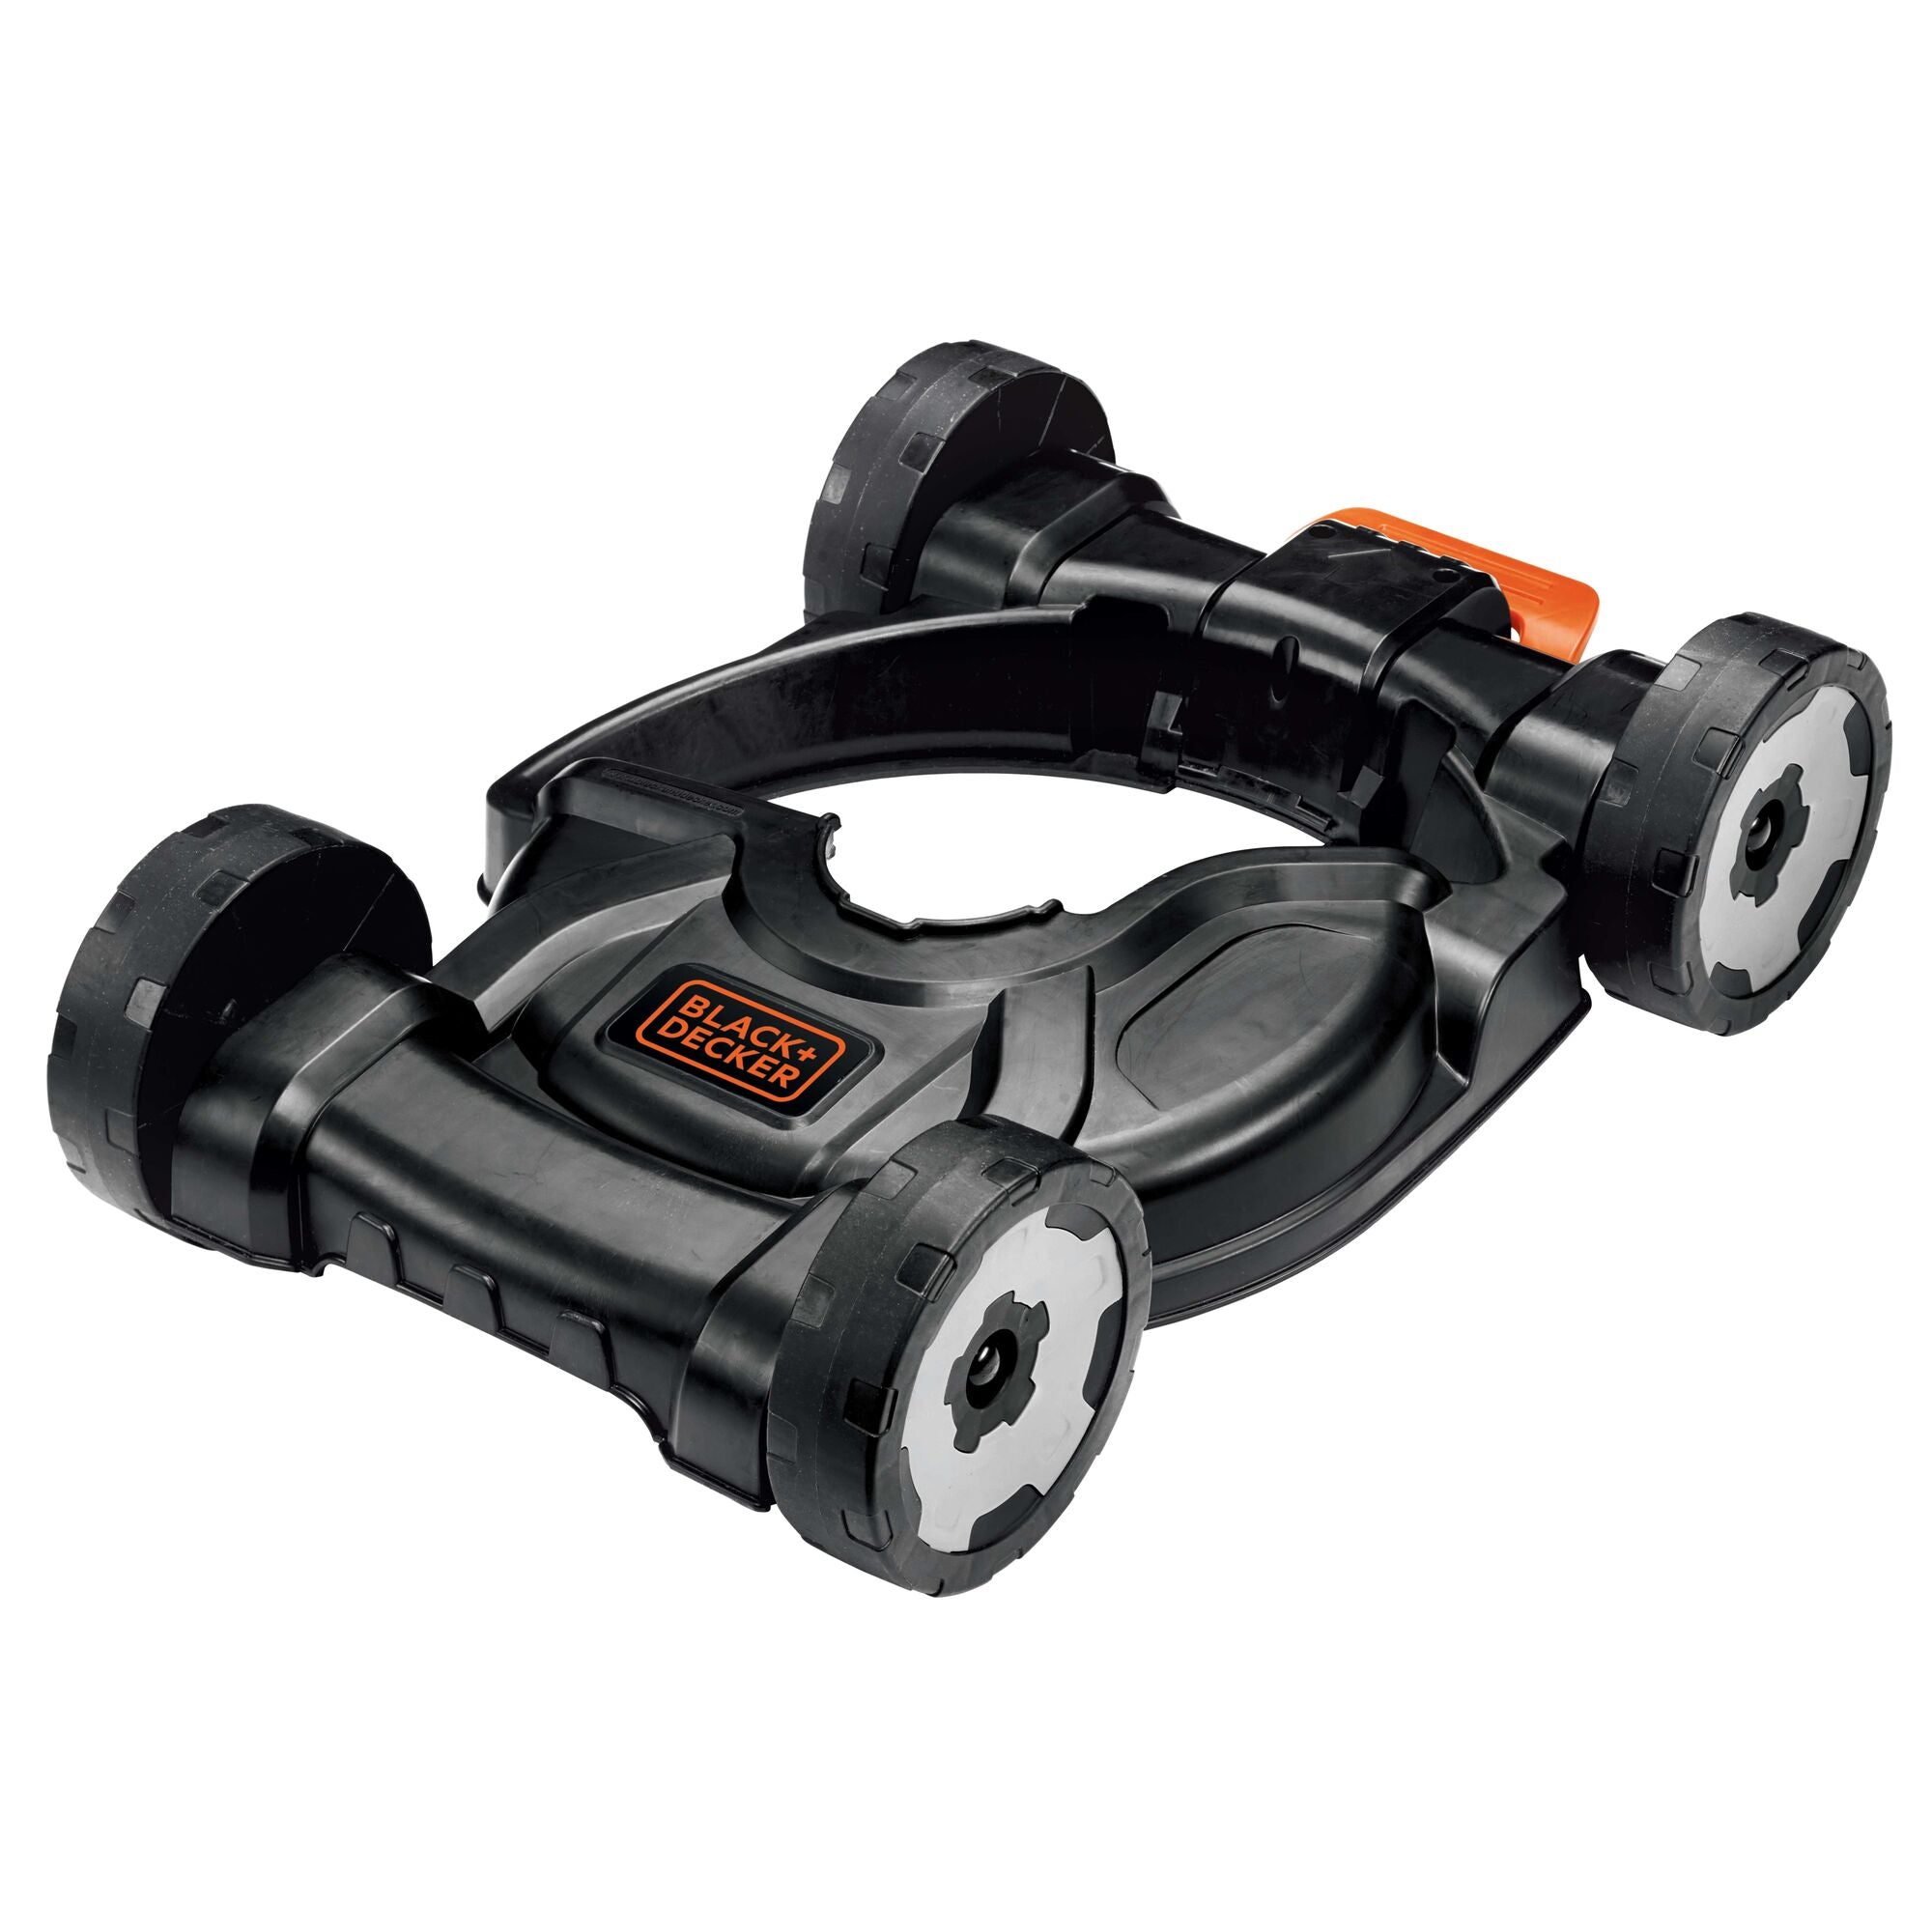 BLACK+DECKER Corded Electric Lawn Mowers, Parts & Accessories for sale